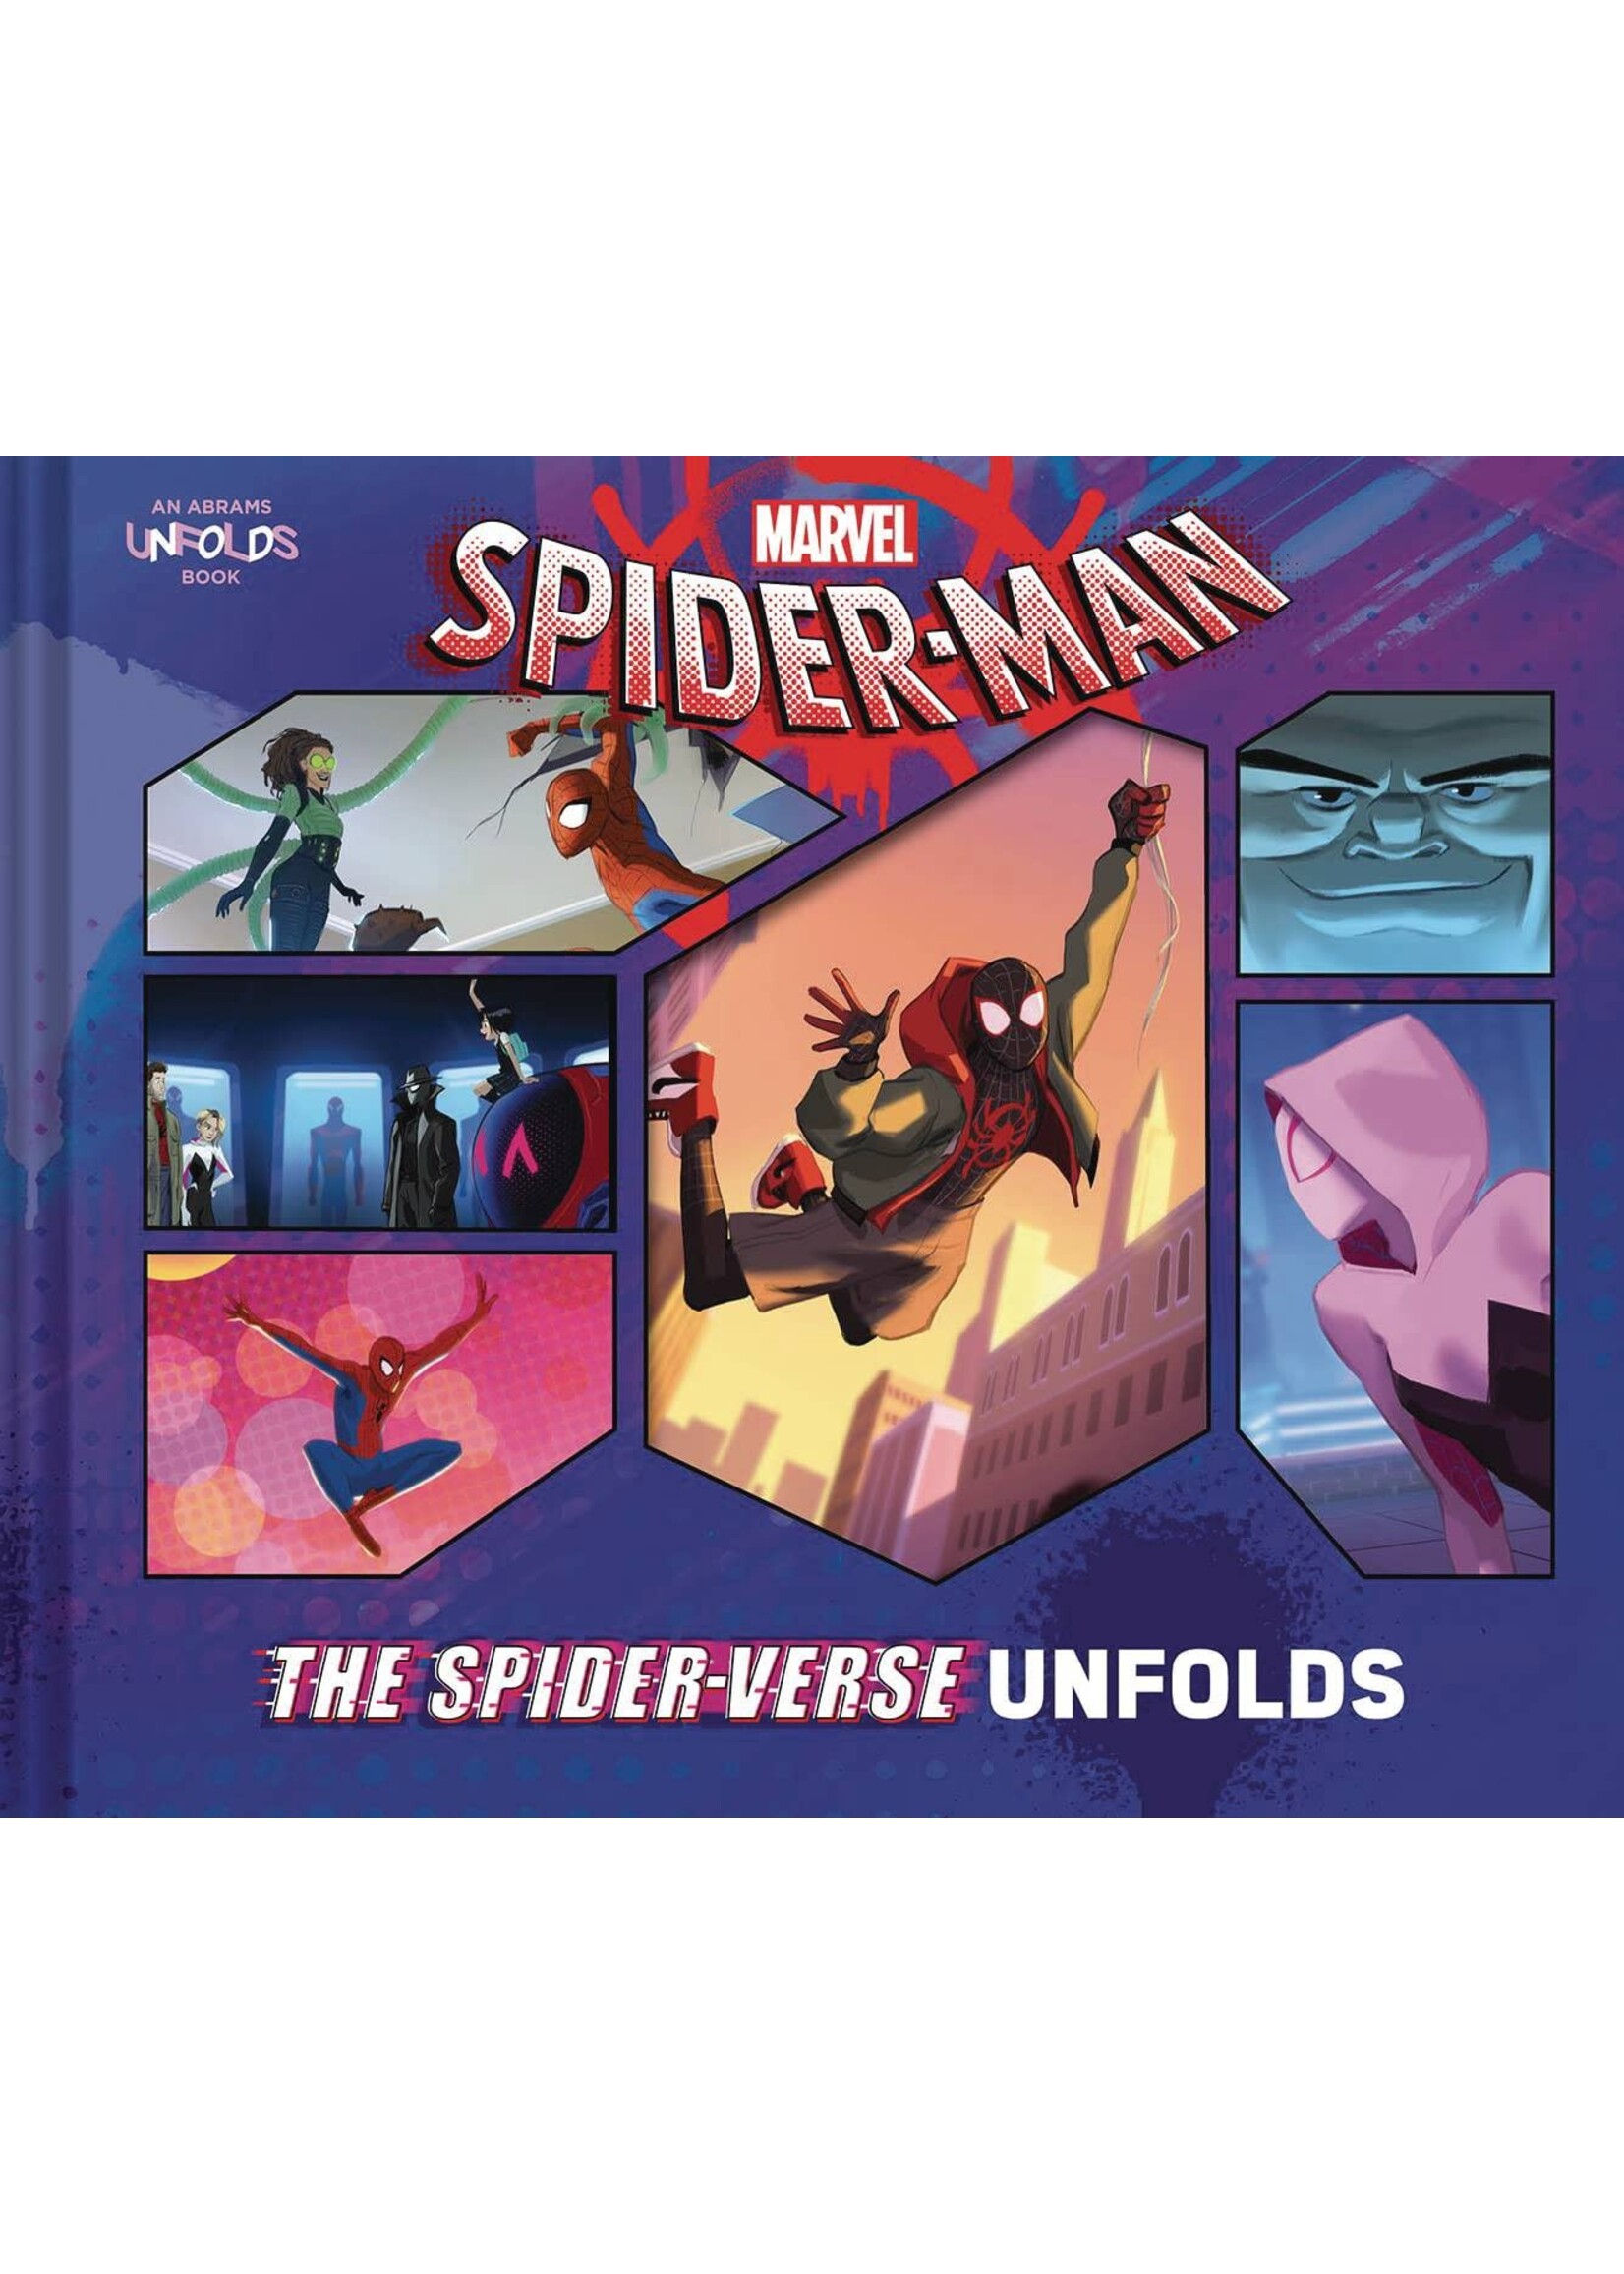 ABRAMS BOOKS FOR YOUNG READERS SPIDER-MAN THE SPIDER-VERSE UNFOLDS HC